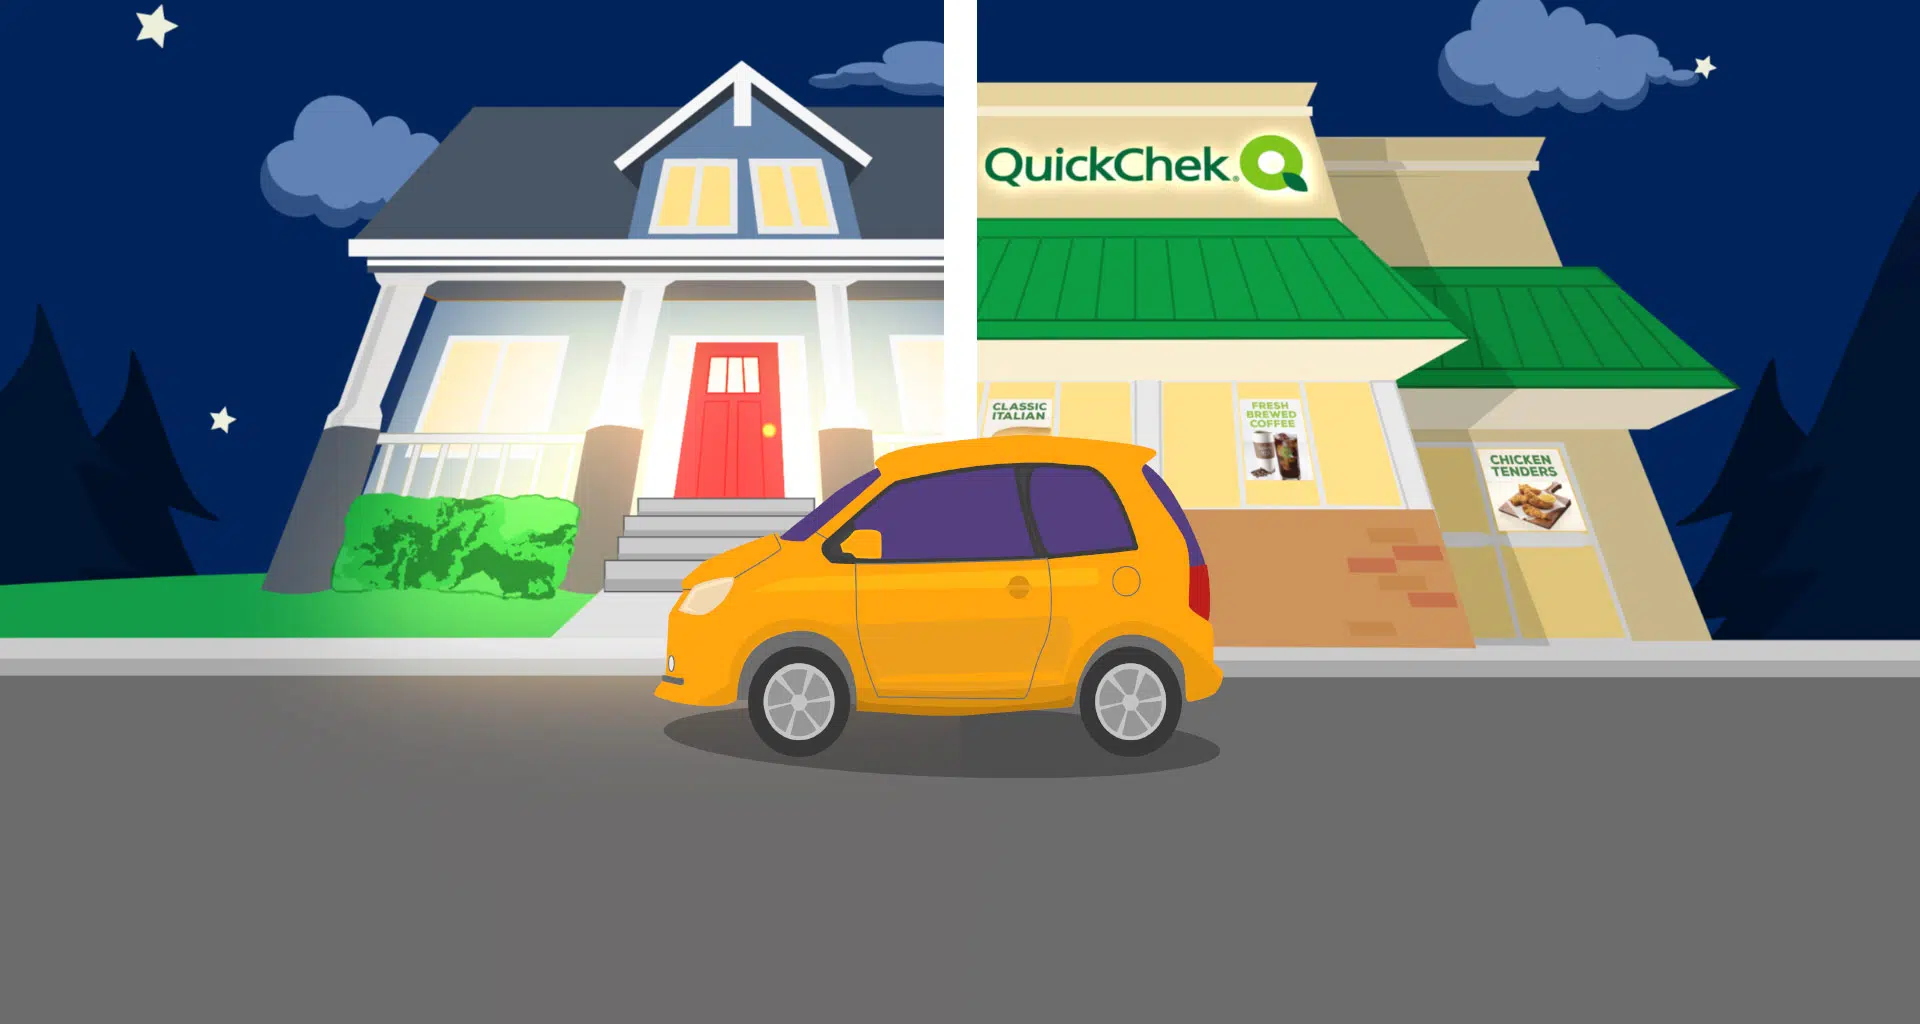 Marketing Campaign for QuickChek